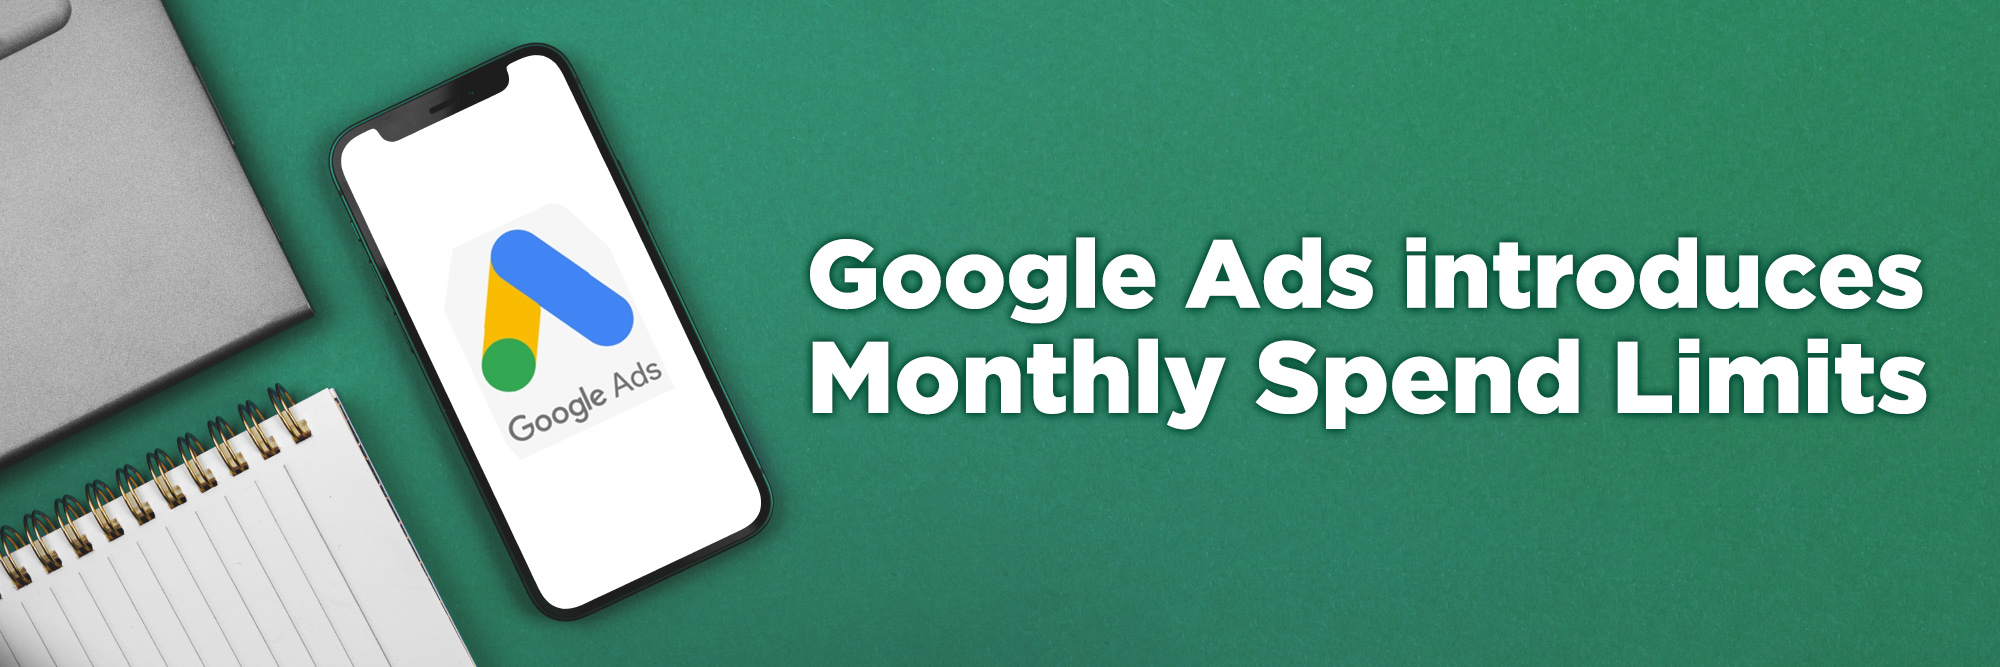 Google Ads Monthly Spend Limits